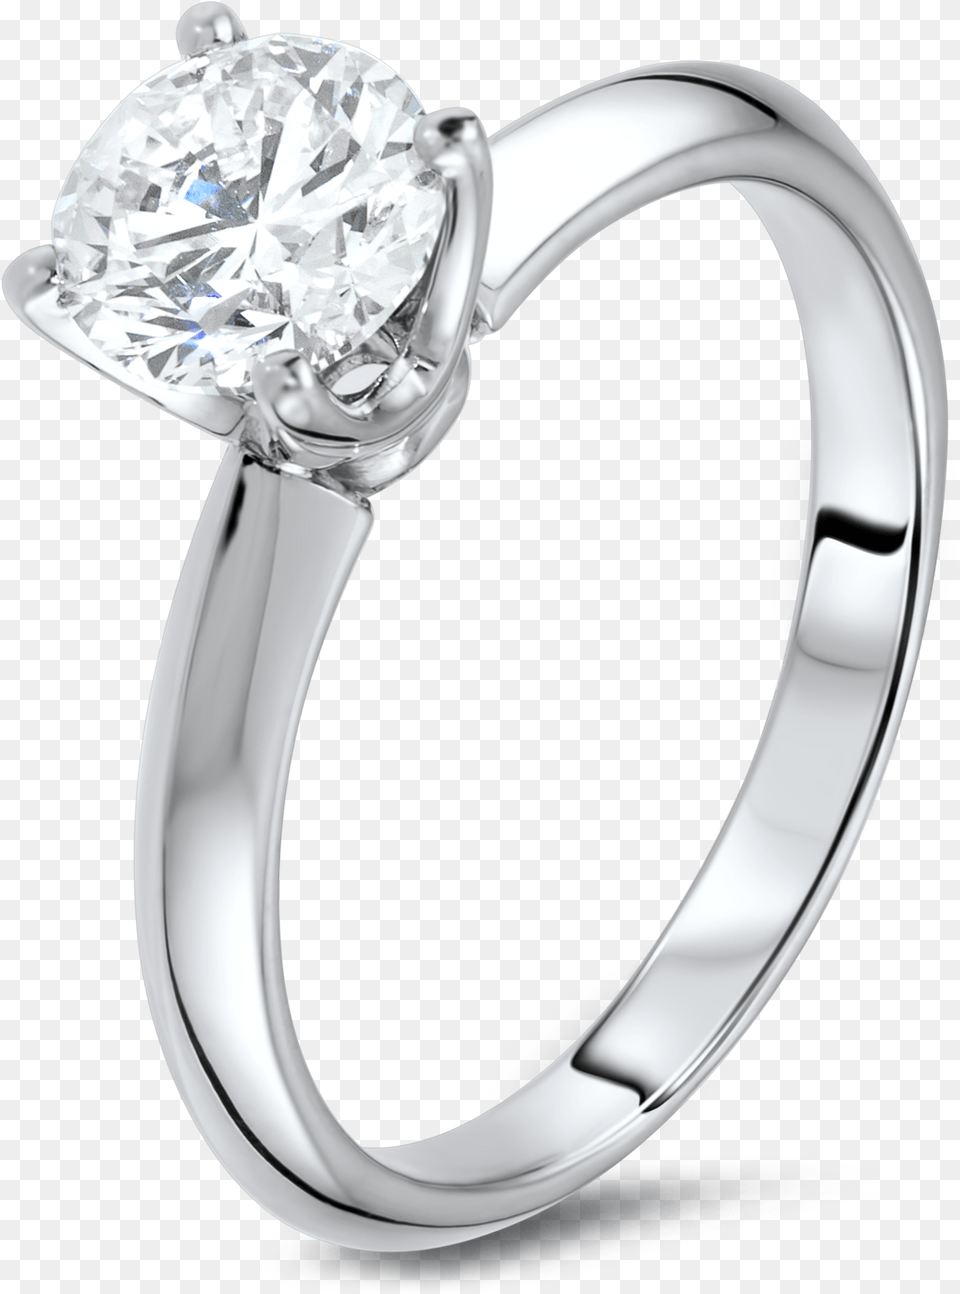 Ring Drawing Realistic Wedding Ring Silver, Accessories, Diamond, Gemstone, Jewelry Png Image